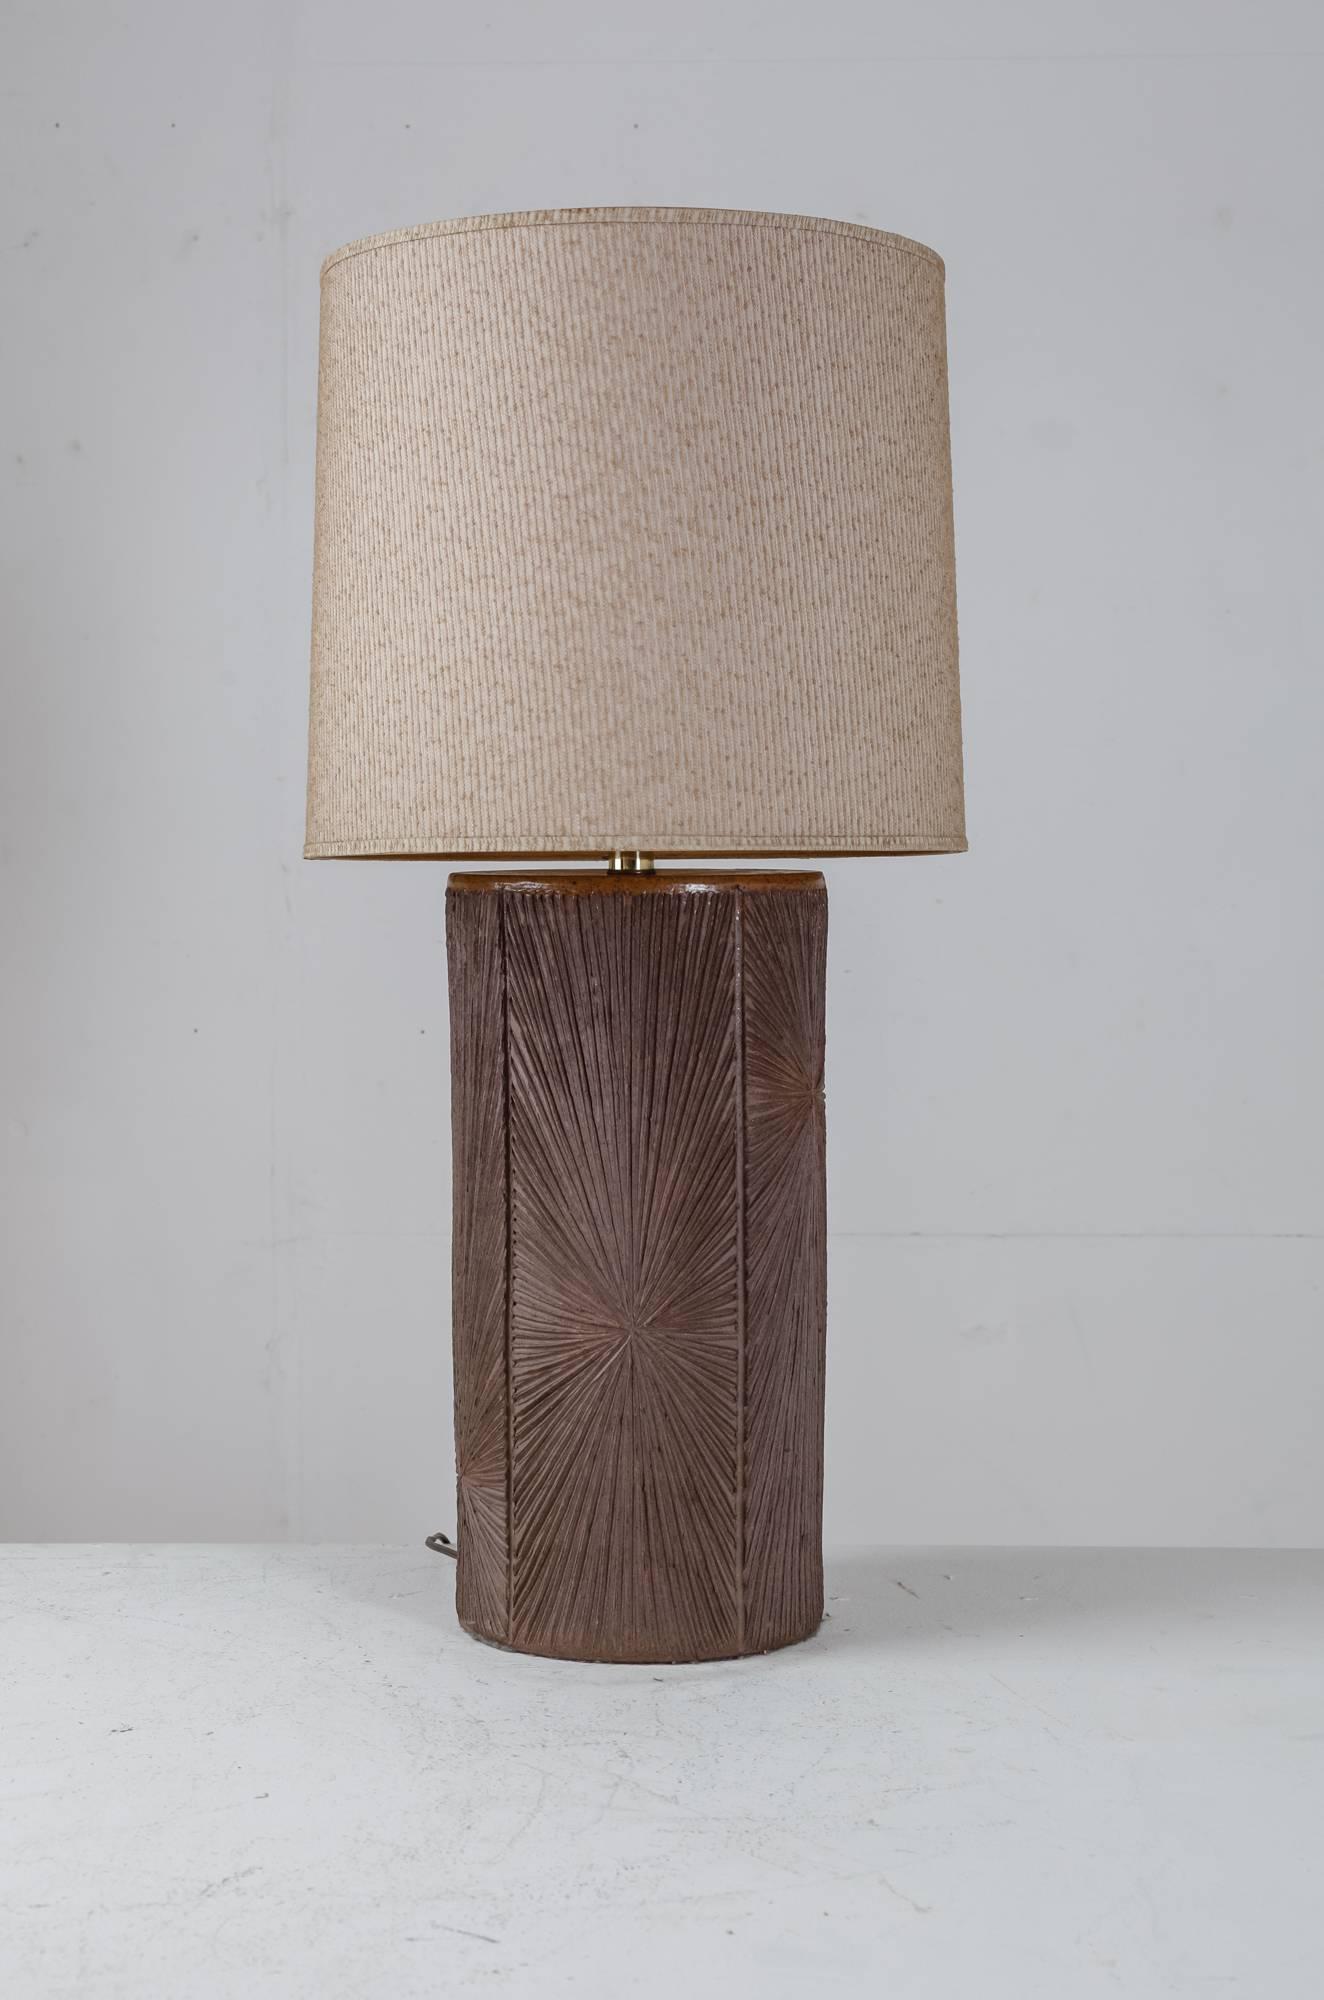 A large cylindrical table lamp made of brown ceramic. The ceramic has been incised with a sunburn pattern.

The measurements and shipping costs stated are of the lamp without shade.